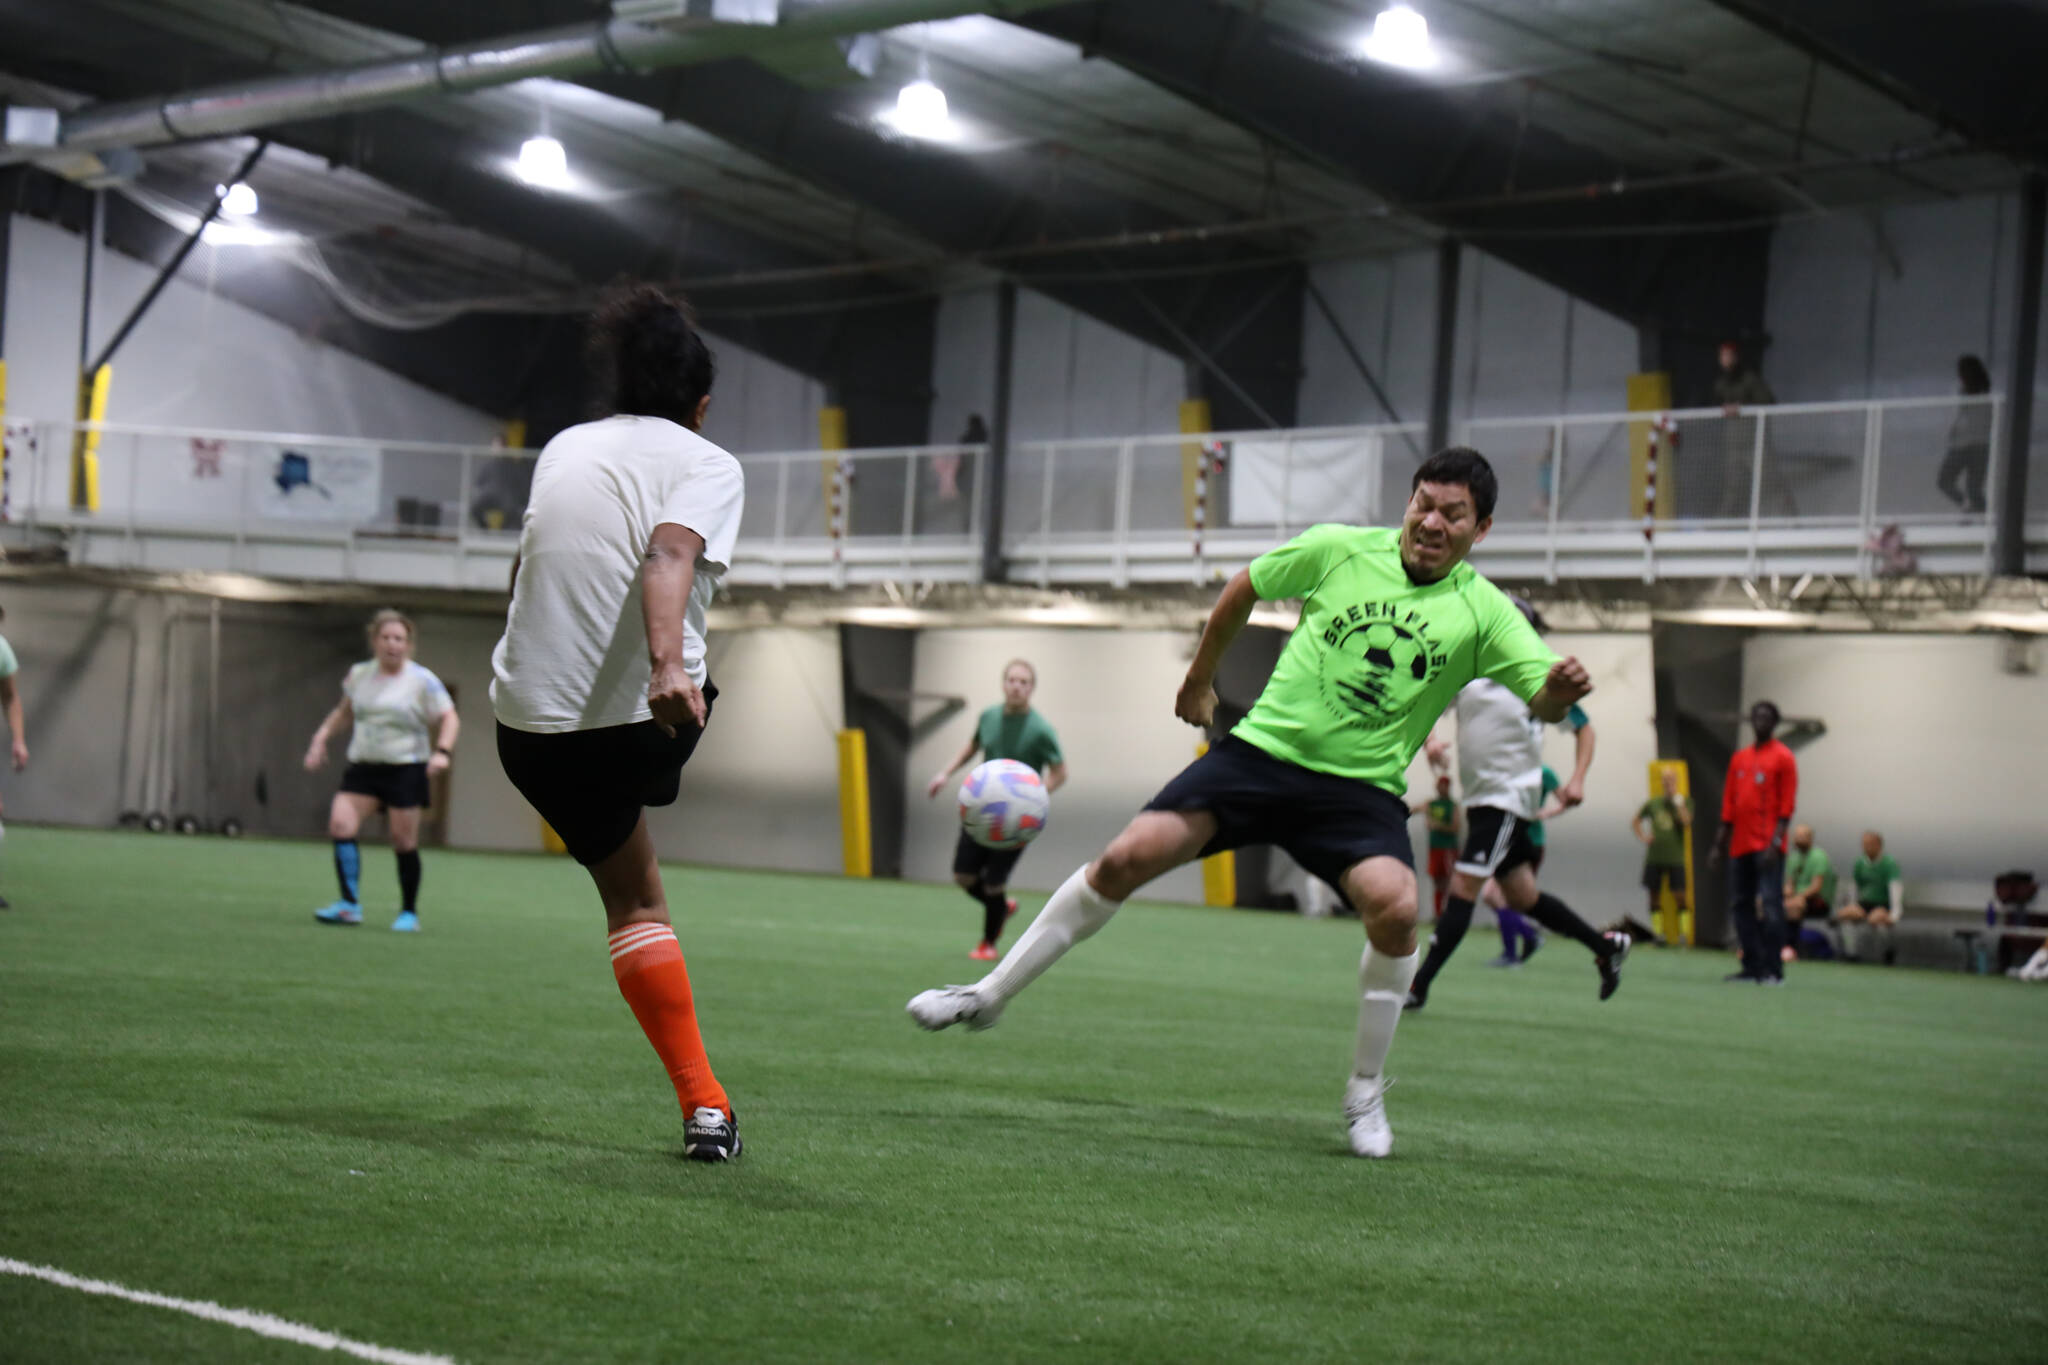 Rachelle Garrett kicks the ball over the leg of opposing player, Ariel Barrios, during a soccer match Monday evening at the Dimond Park Field House a part of the Holiday Cup soccer tournament. (Clarise Larson / Juneau Empire)